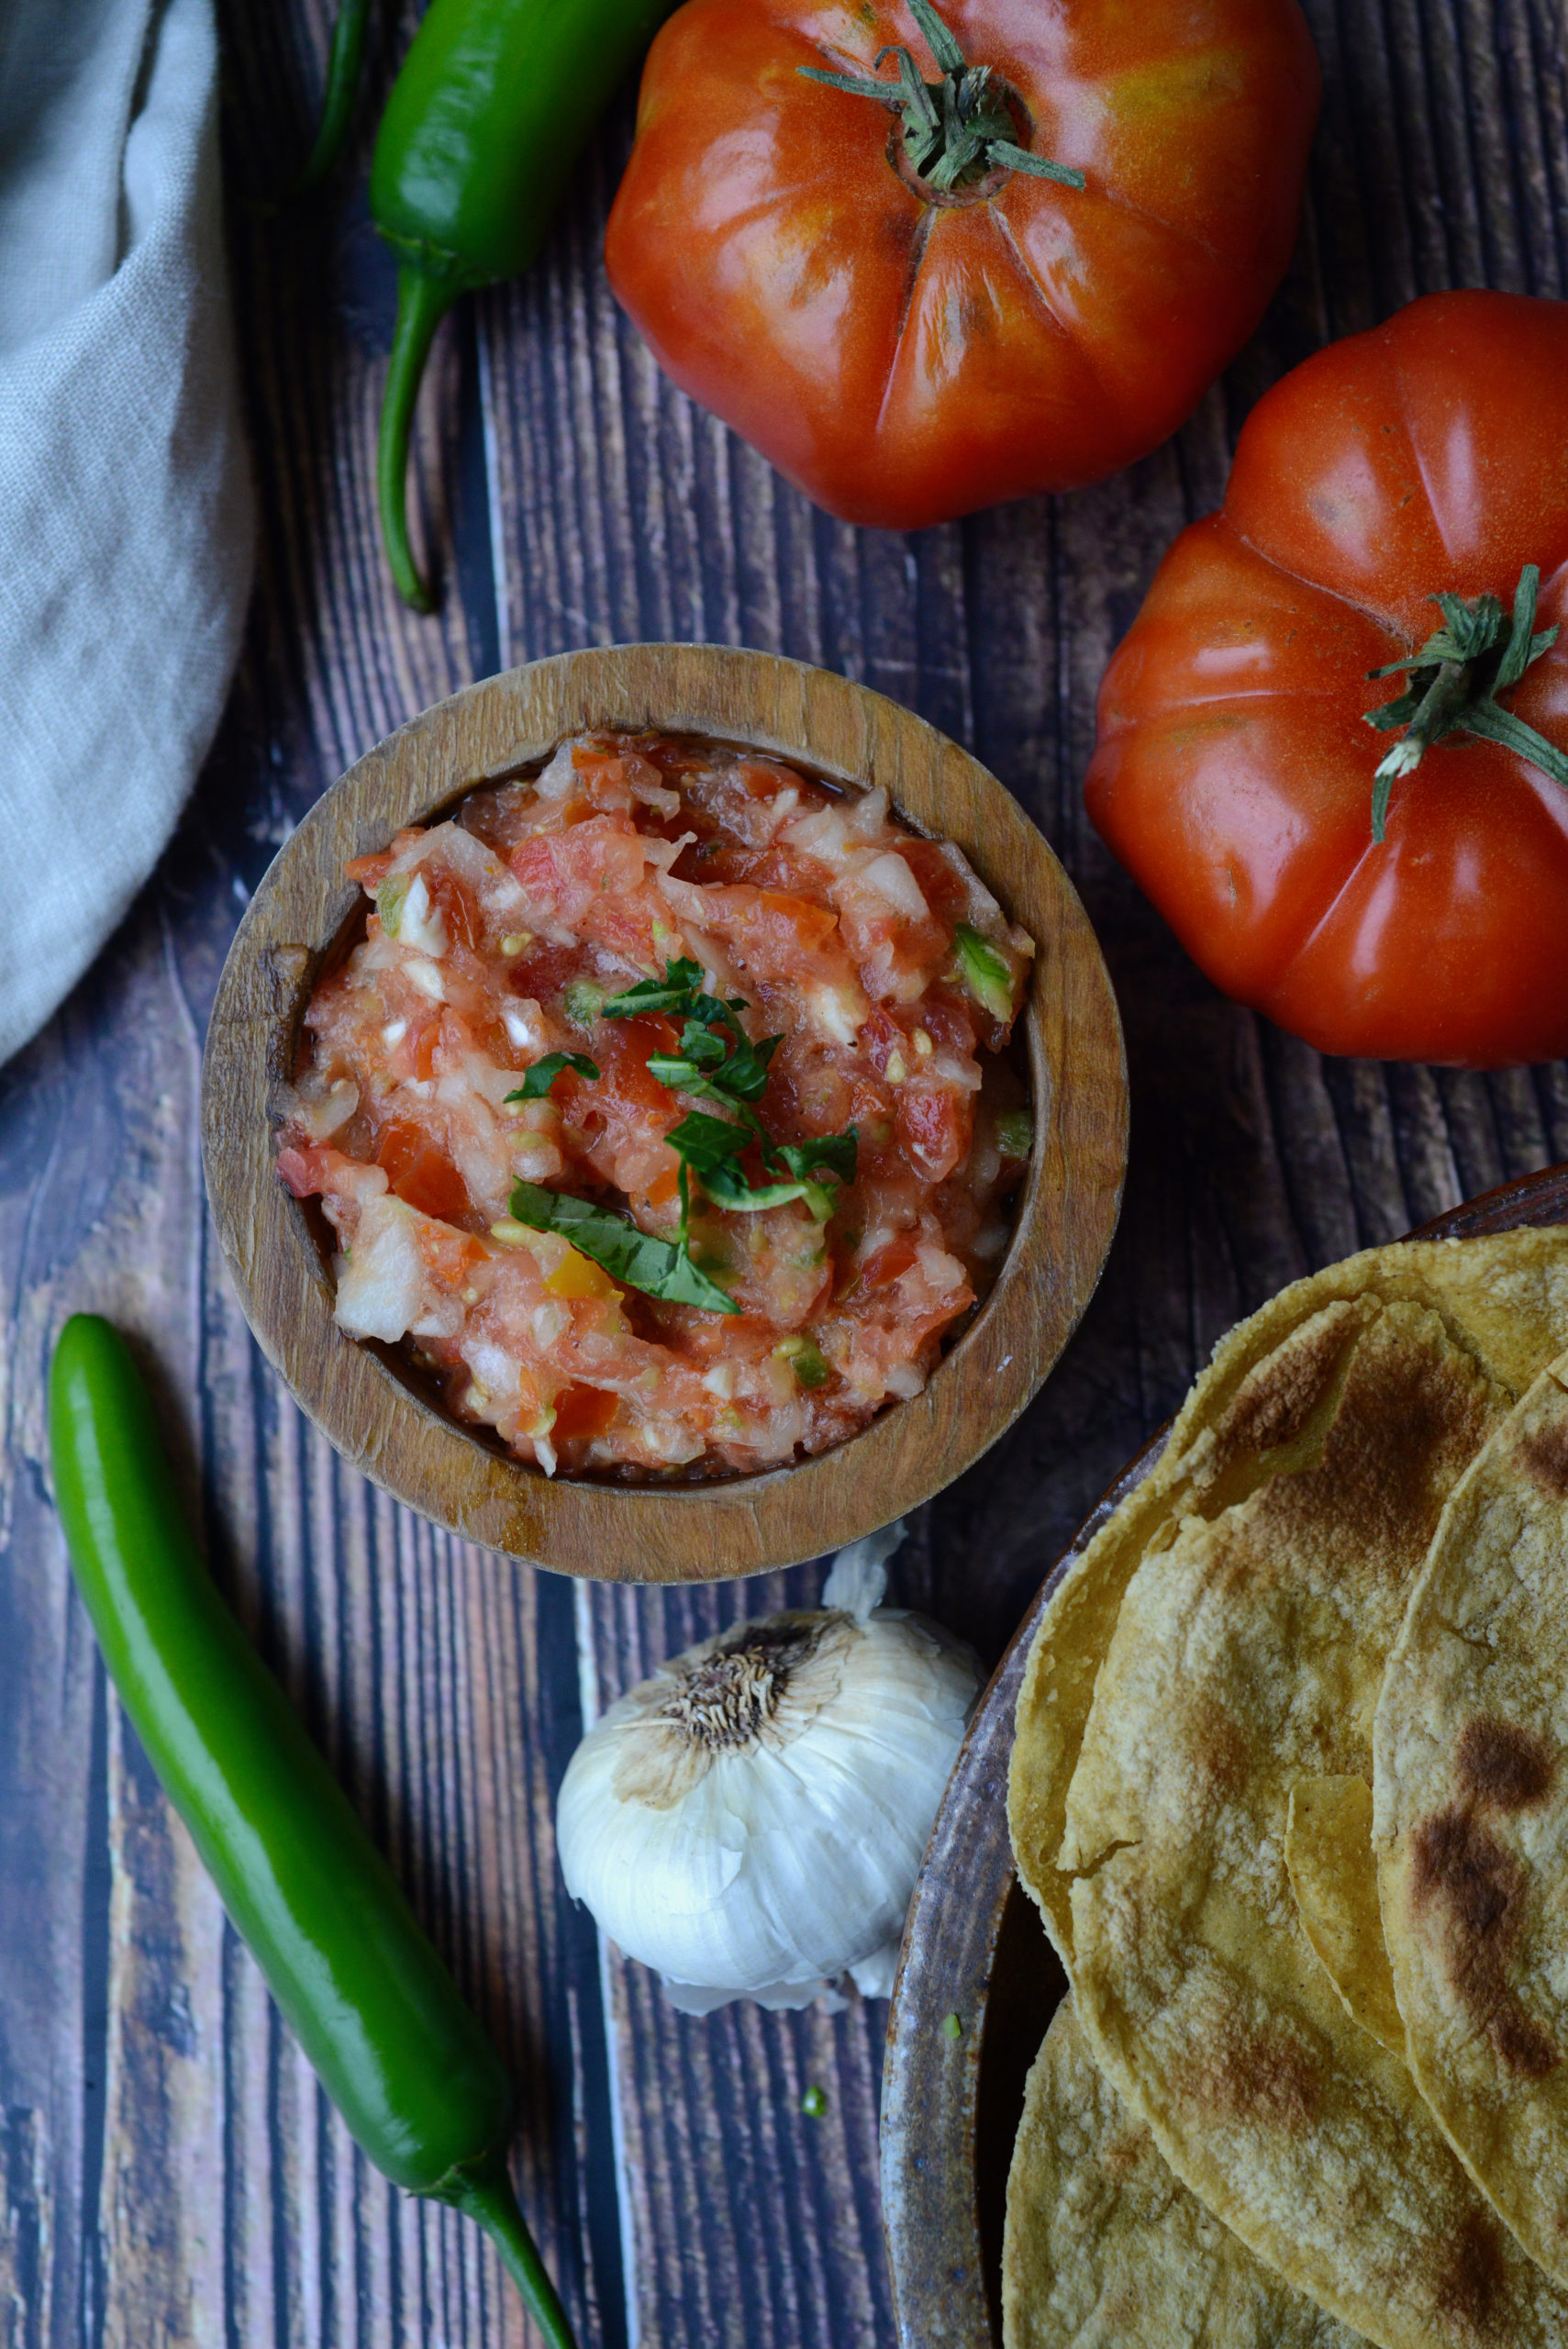 Pico de Gallo [Fresh Raw Salsa] surrounded by tomatoes, garlic, peppers, and toasted tortillas